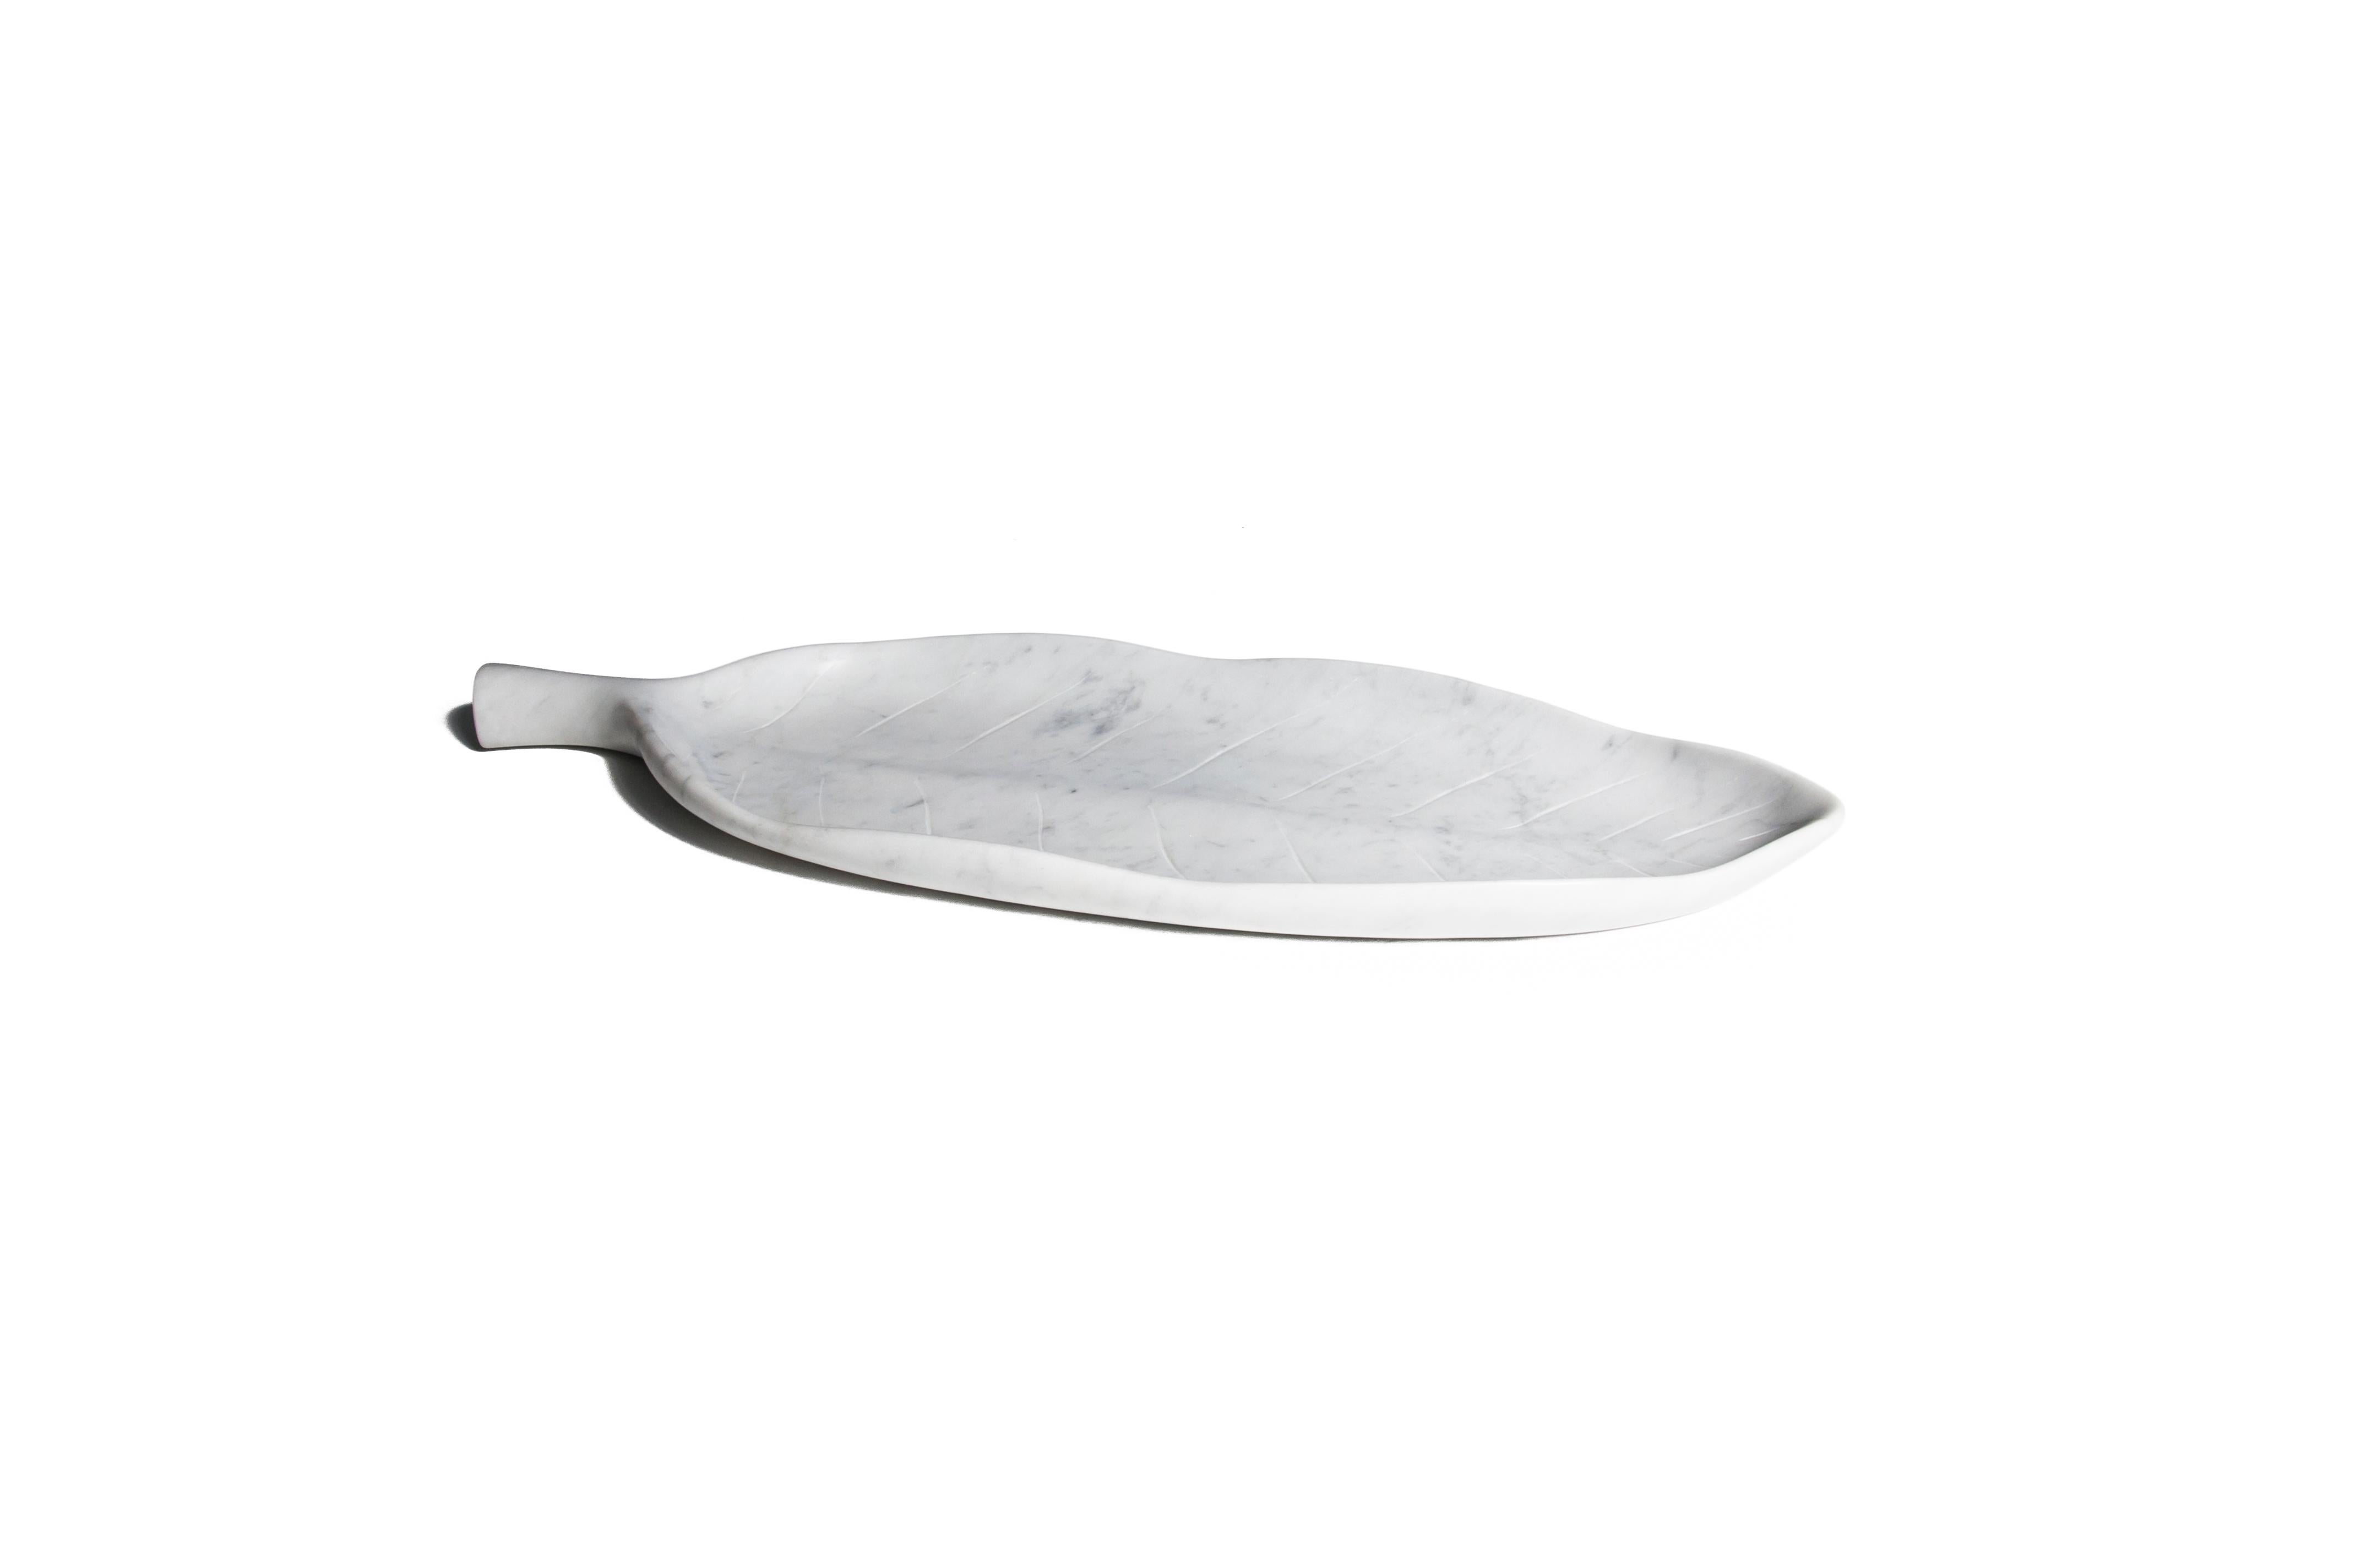 Hand-Crafted Handcraft White Carrara Marble Long Leaf Bowl/Centrepiece/Serving Plate